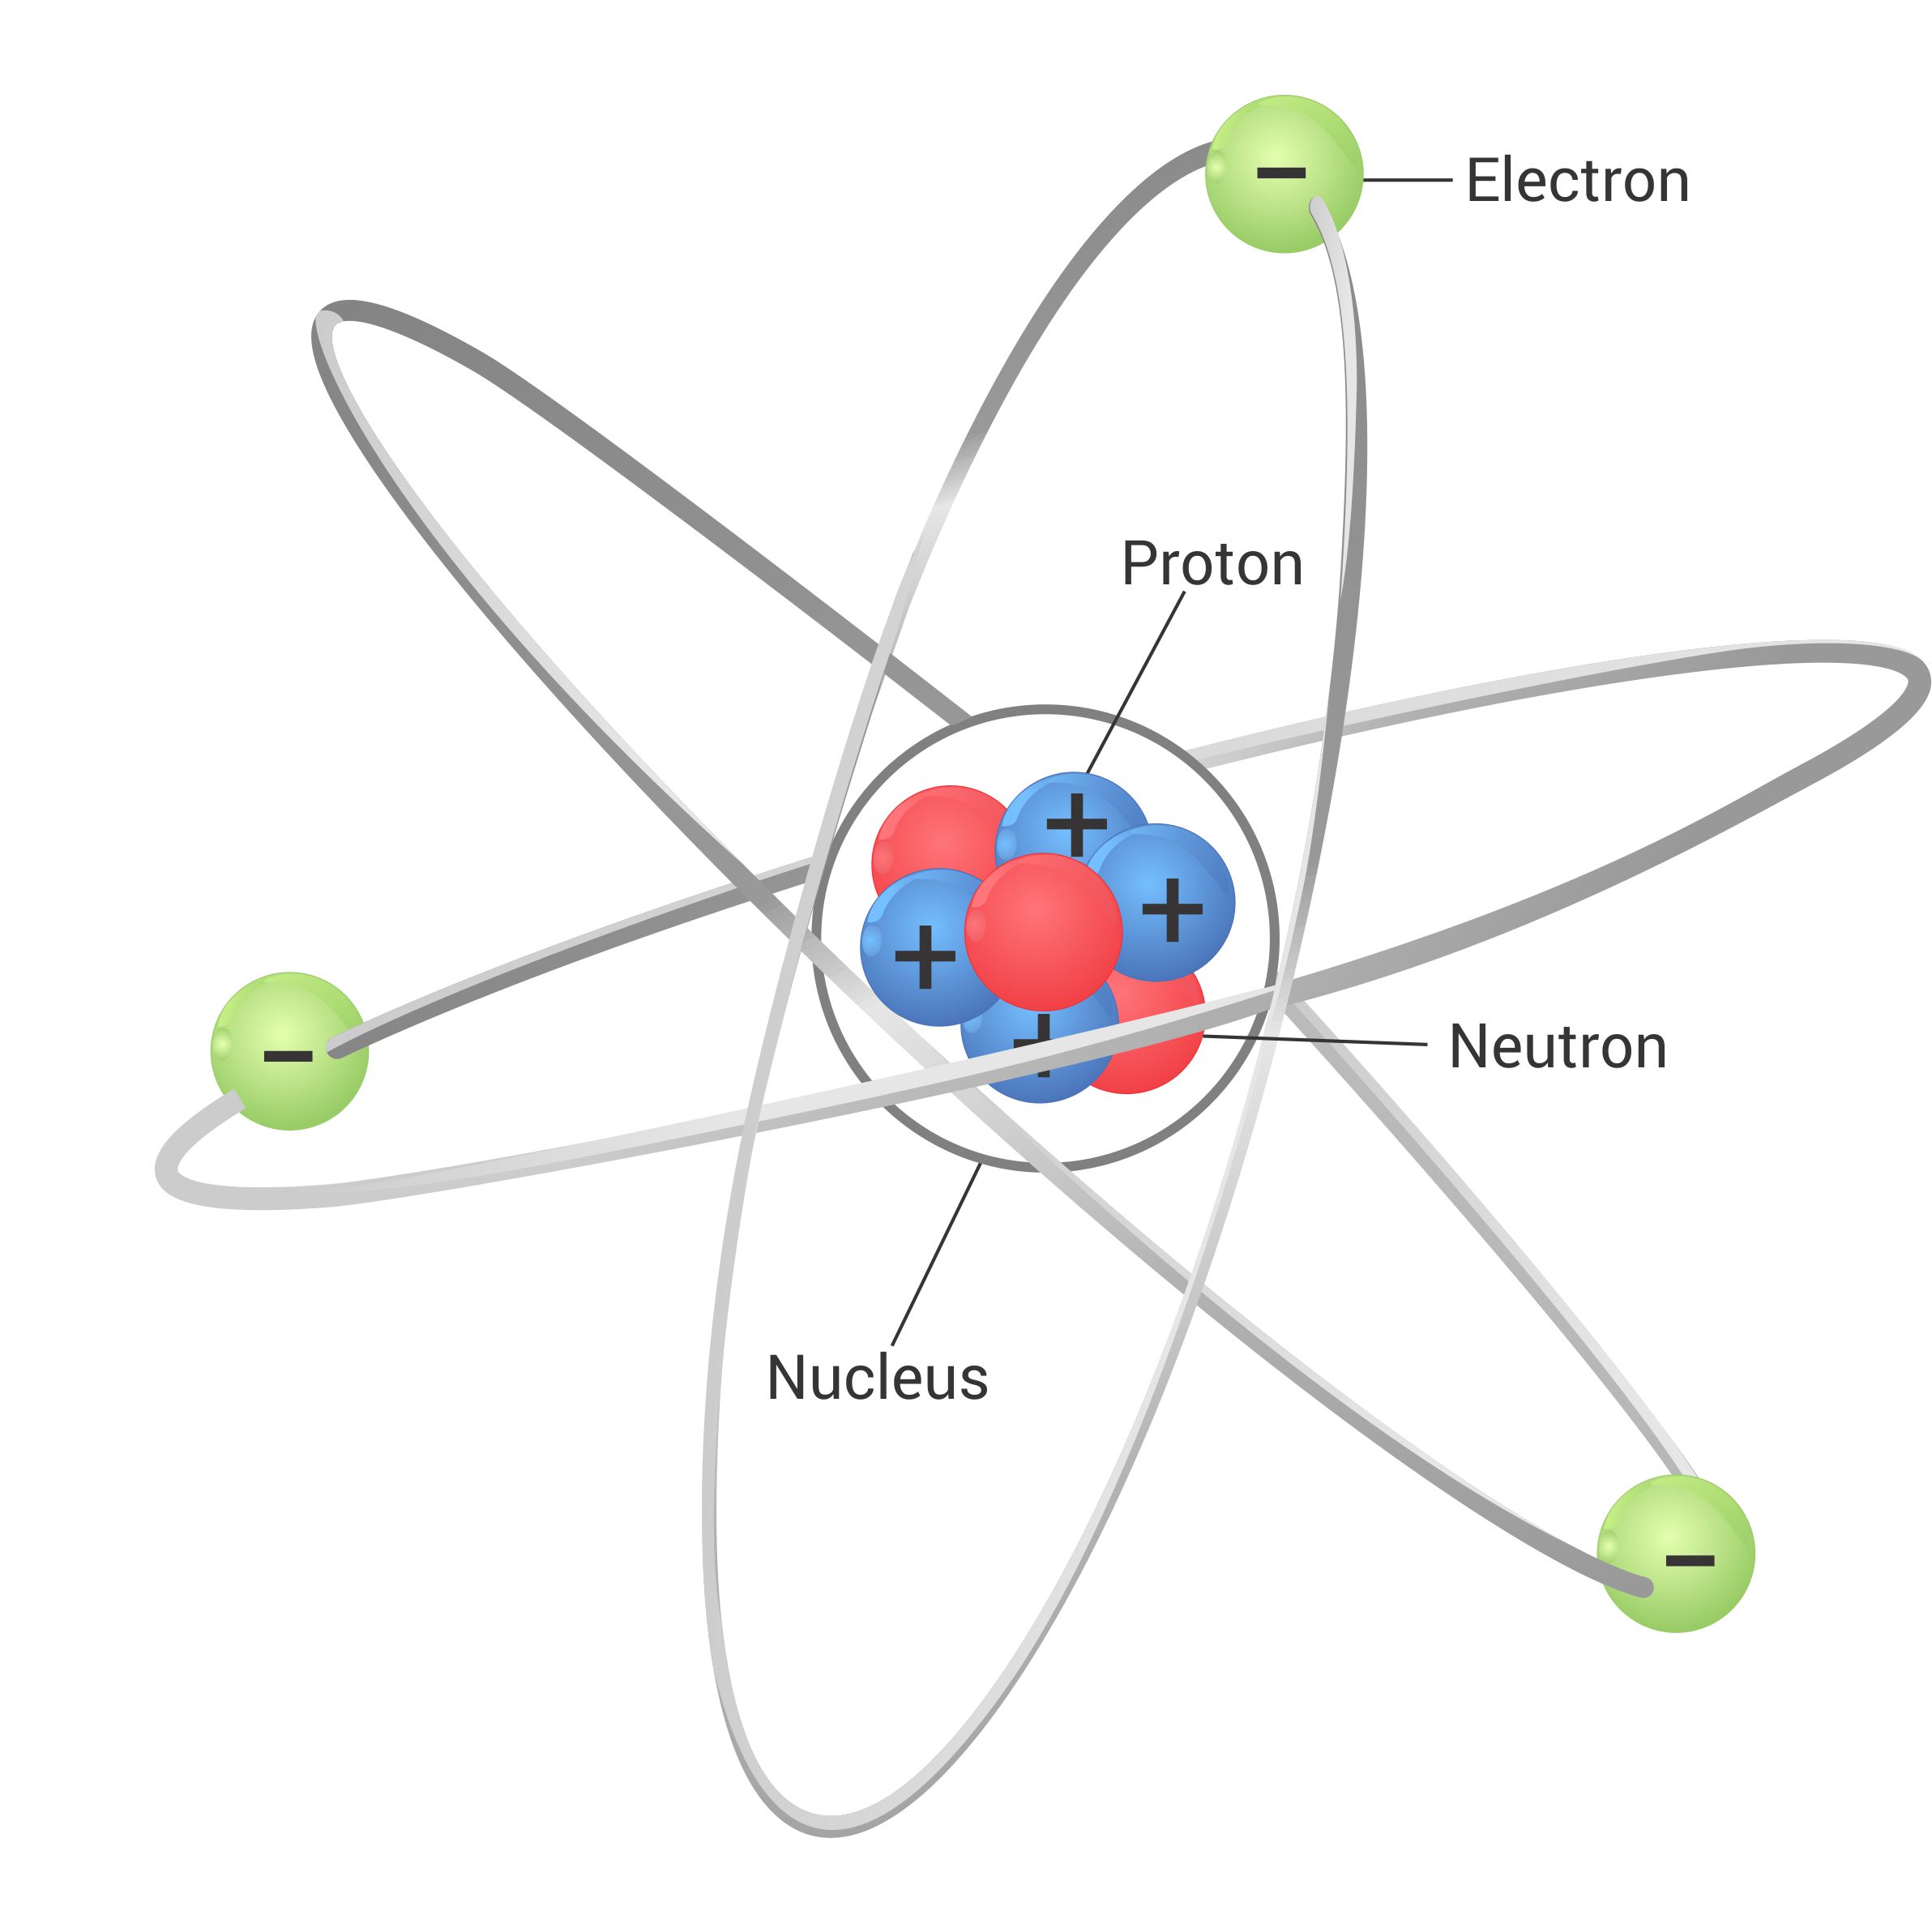 Components of an Atom